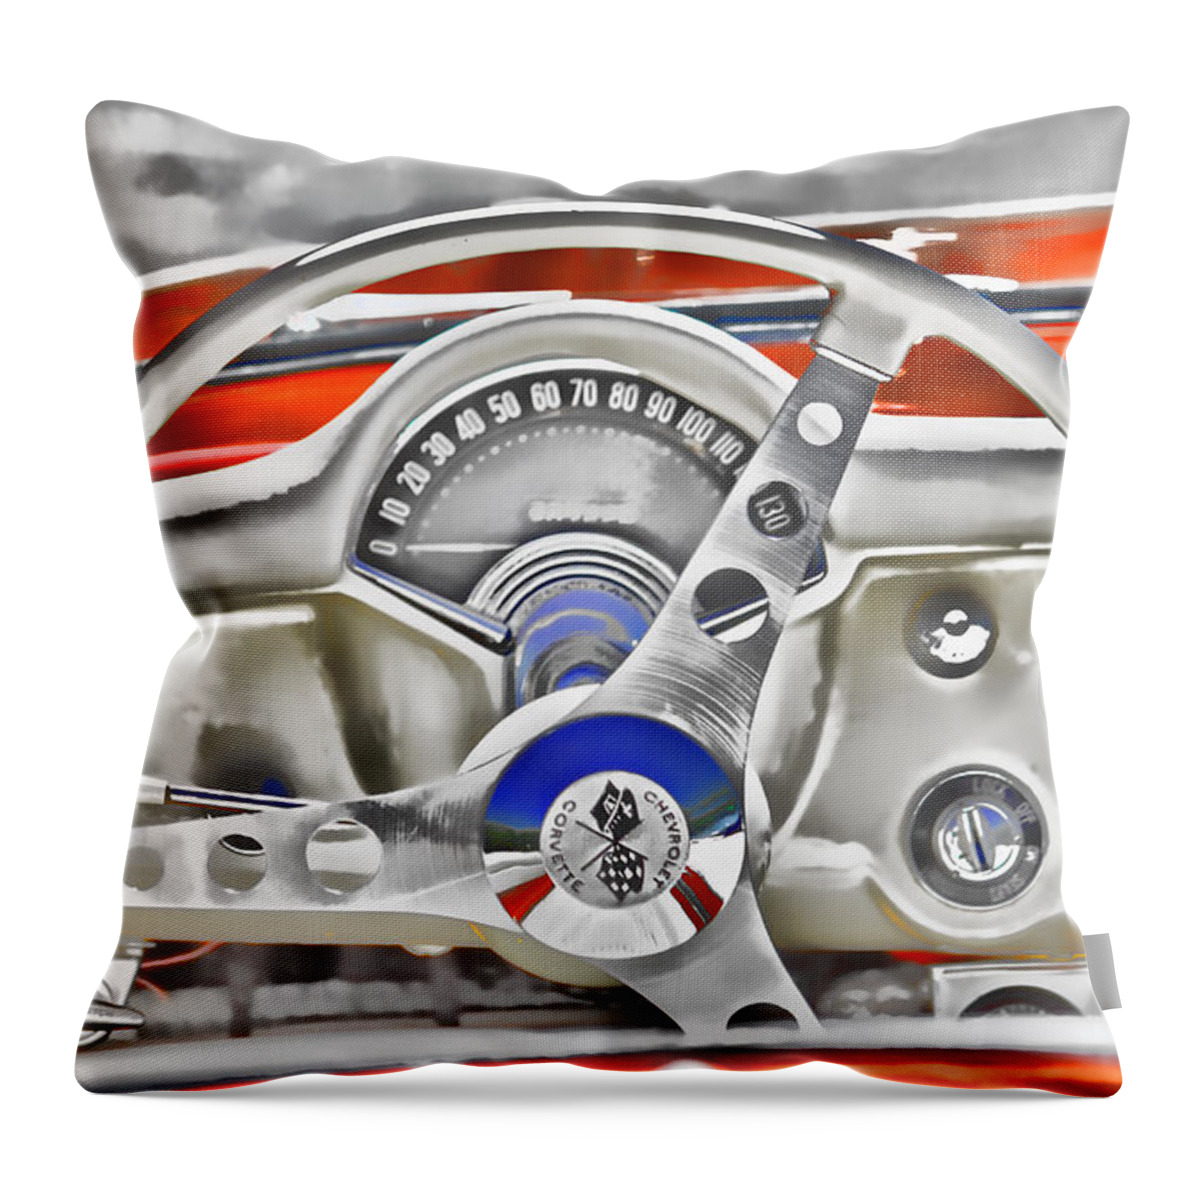 Chevy Throw Pillow featuring the photograph 1956 Chevy Corvette Dash Wowc by Kevin Anderson